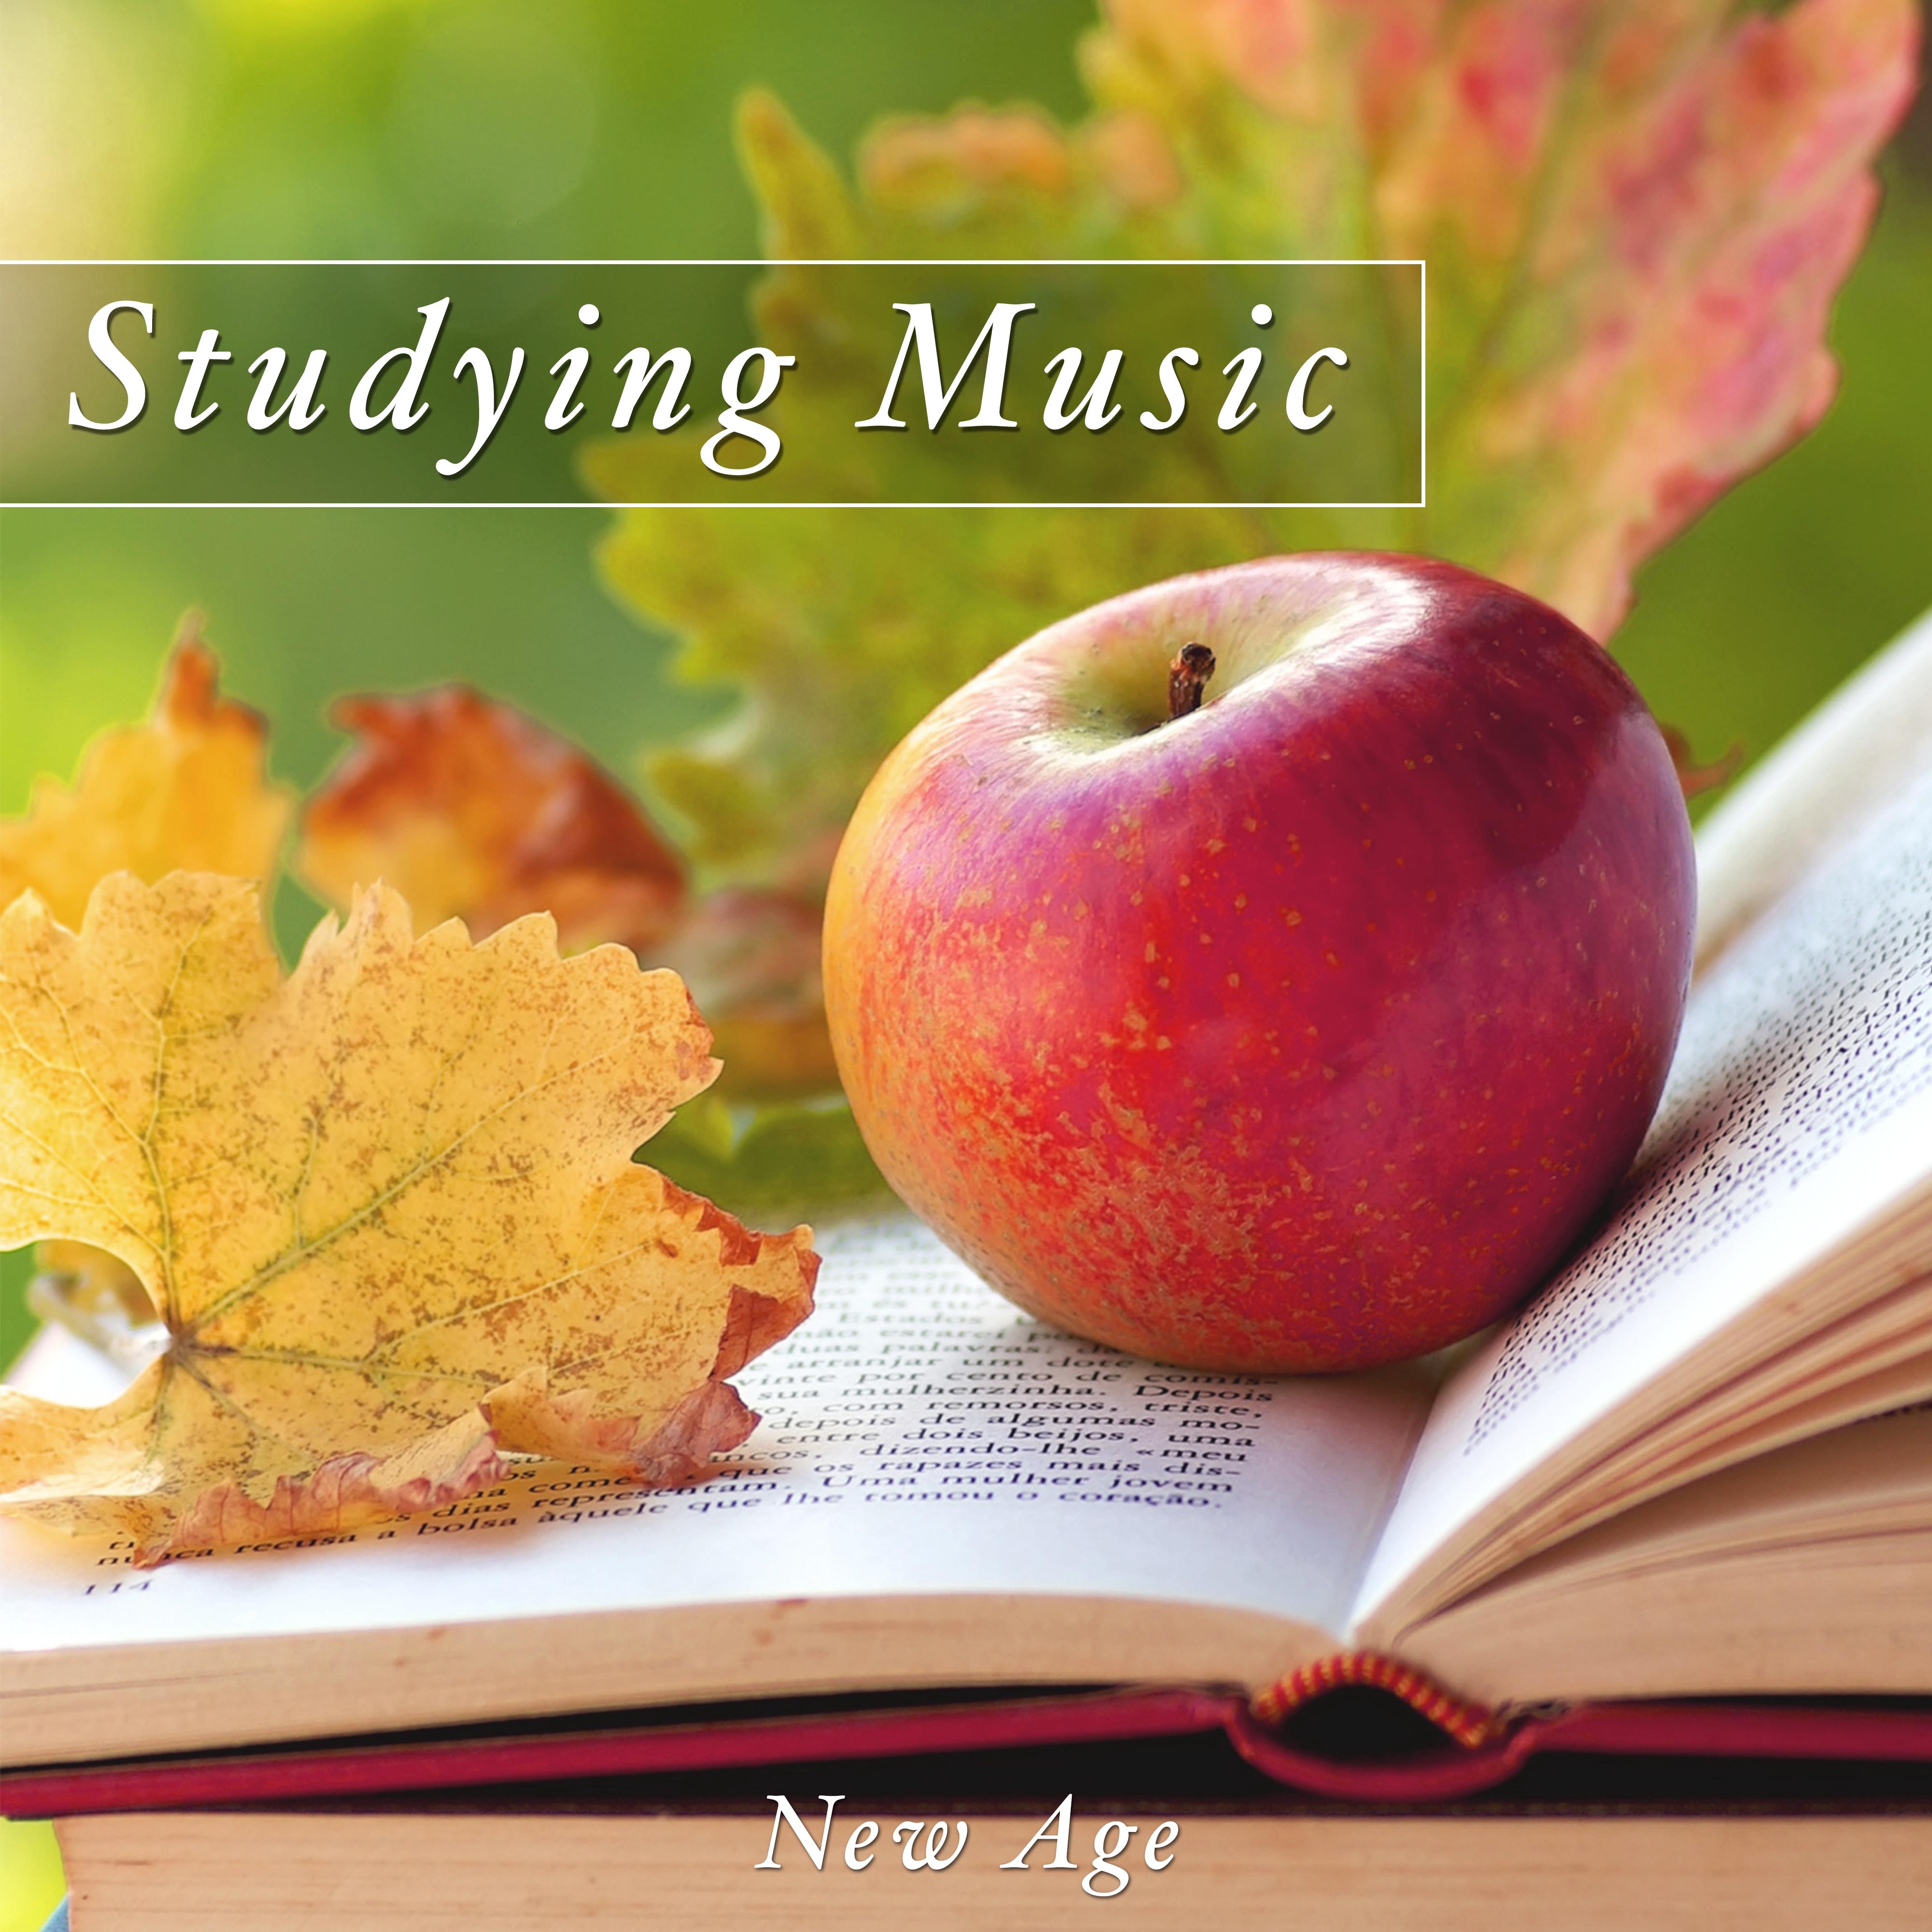 Studying Music: the Best Relaxing New Age Music to Help you Concentrate and Read during your Study Sessions